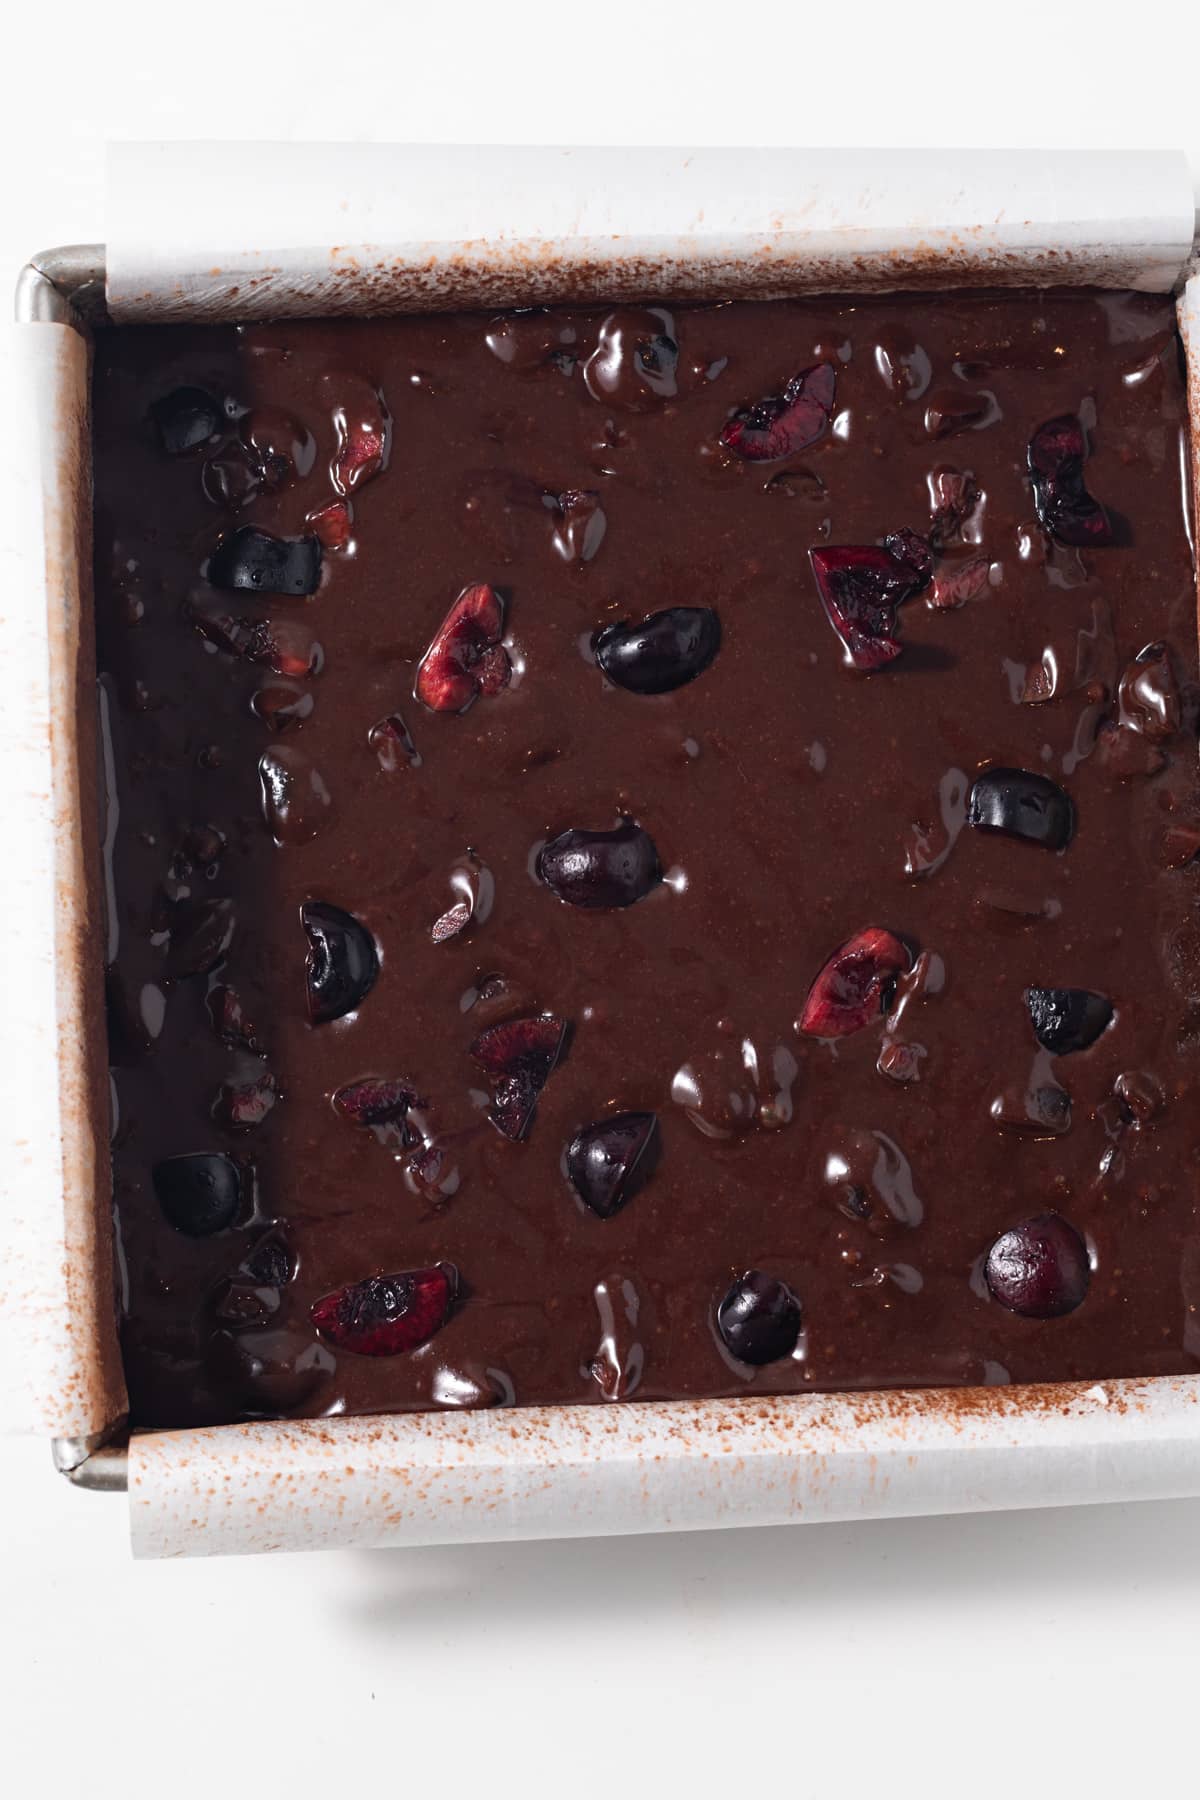 Unbaked brownie batter with cherries in a baking pan.